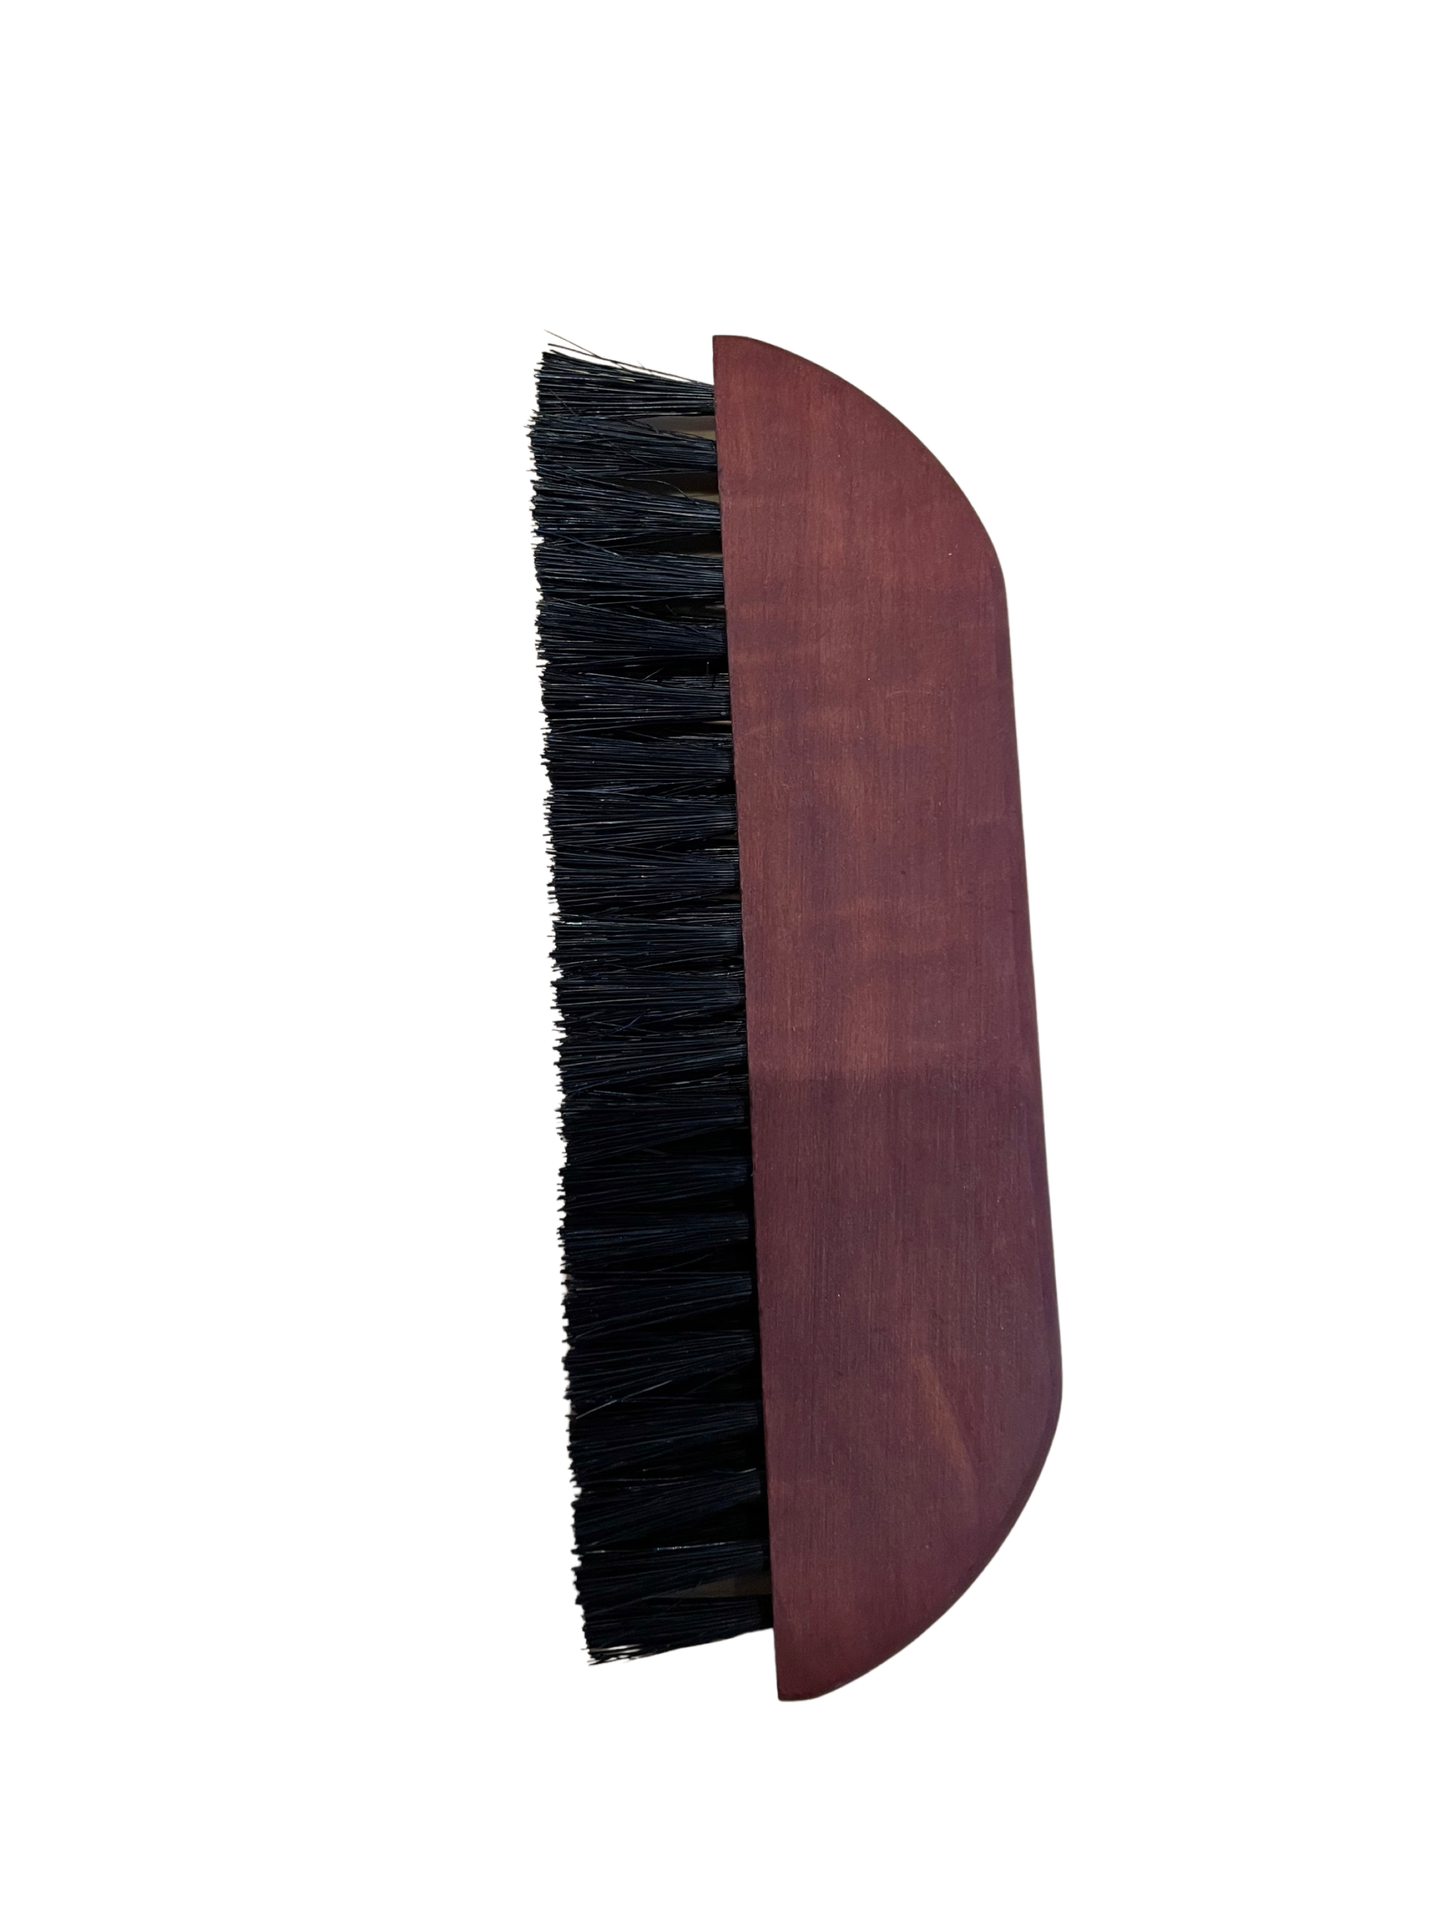 TEXTILE BRUSH POCKET MODEL in pear wood perfect to carry in your bag